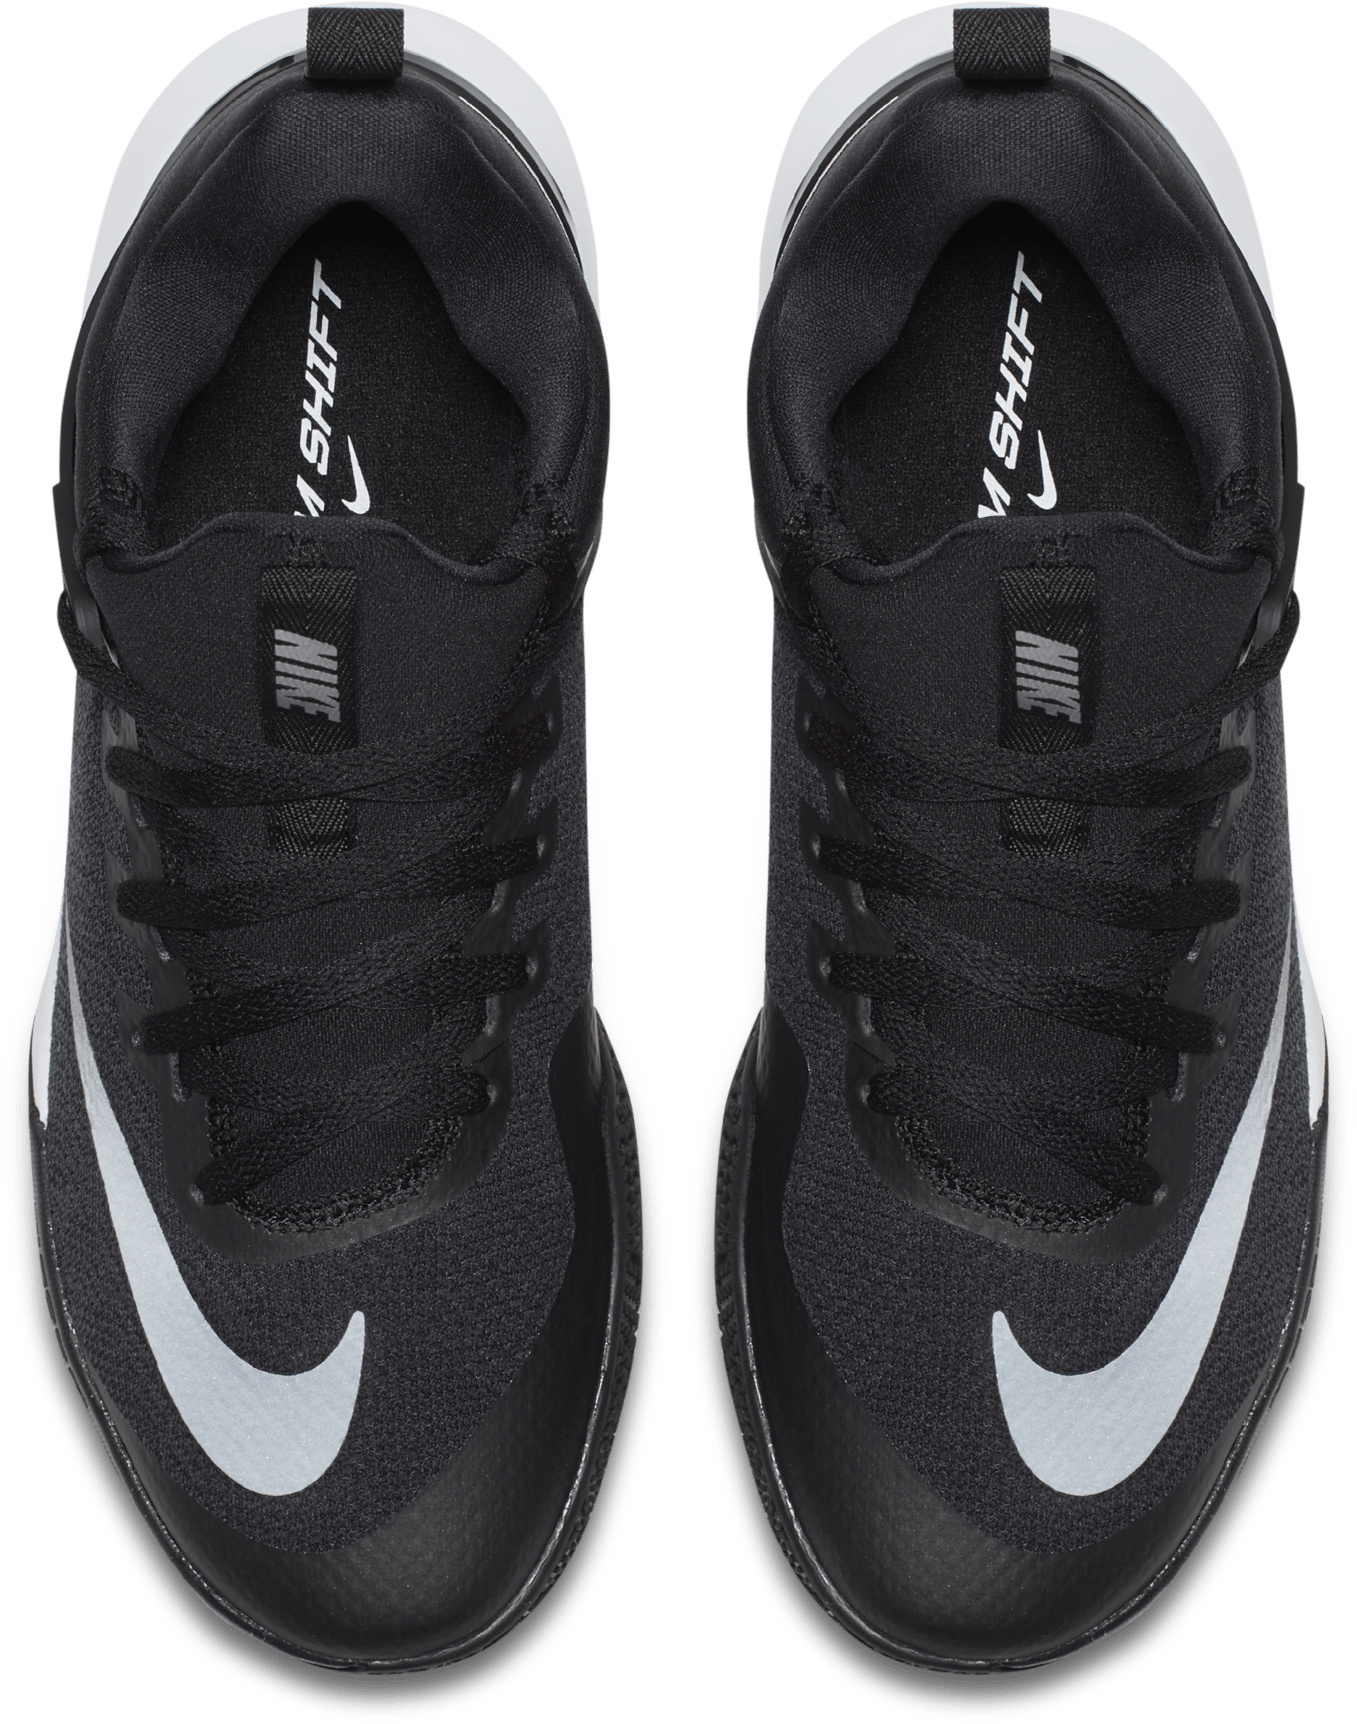 nike zoom shift 2 performance review